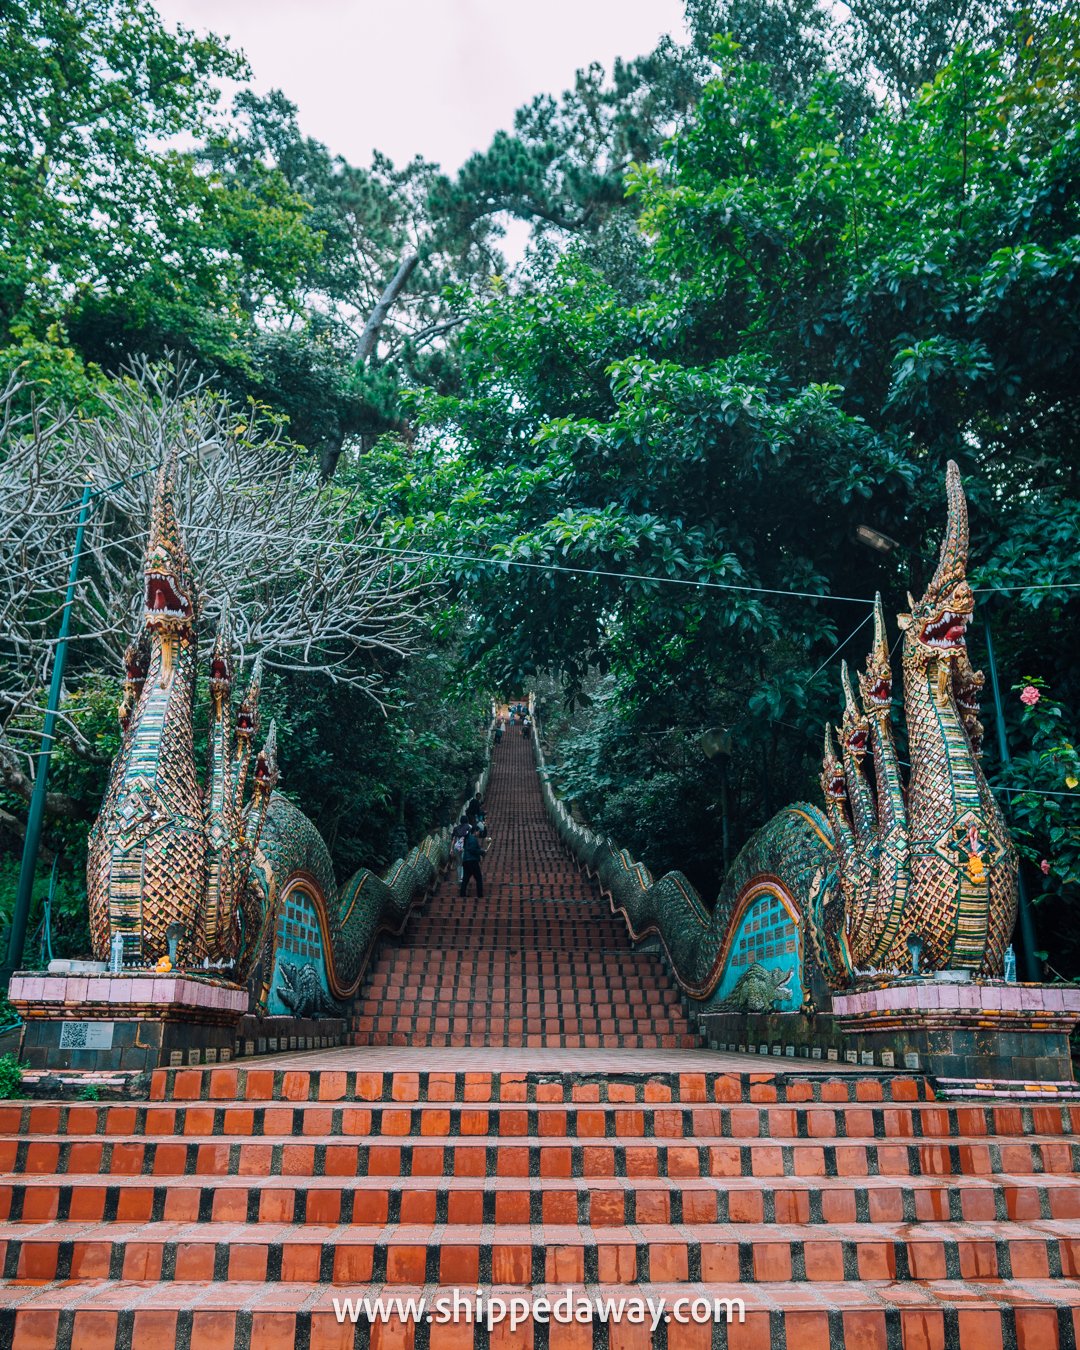 top things to do in Chiang Mai, Chiang Mai attractions - 300 steps staircase to Wat Phra That Doi Suthep temple above Chiang Mai